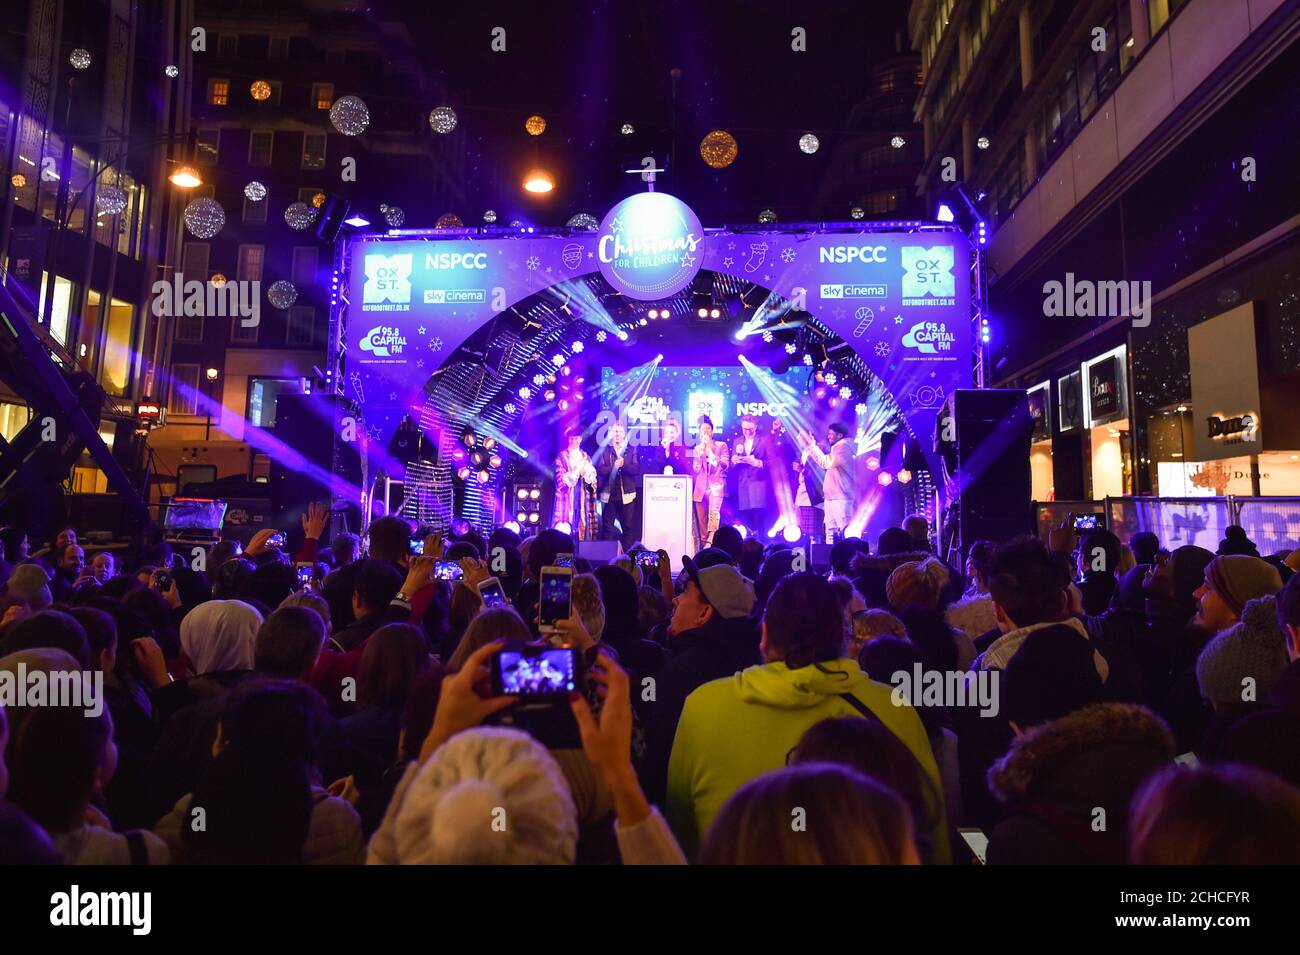 X Factor 2016 winner Matt Terry, and fellow X Factor finalists 5 After Midnight, pose with Capital's Roman Kemp and Vick Hope at the Oxford Street Christmas lights switch on in central London, in partnership with the NSPCC's ÔLight Up Christmas for Children' campaign. Stock Photo